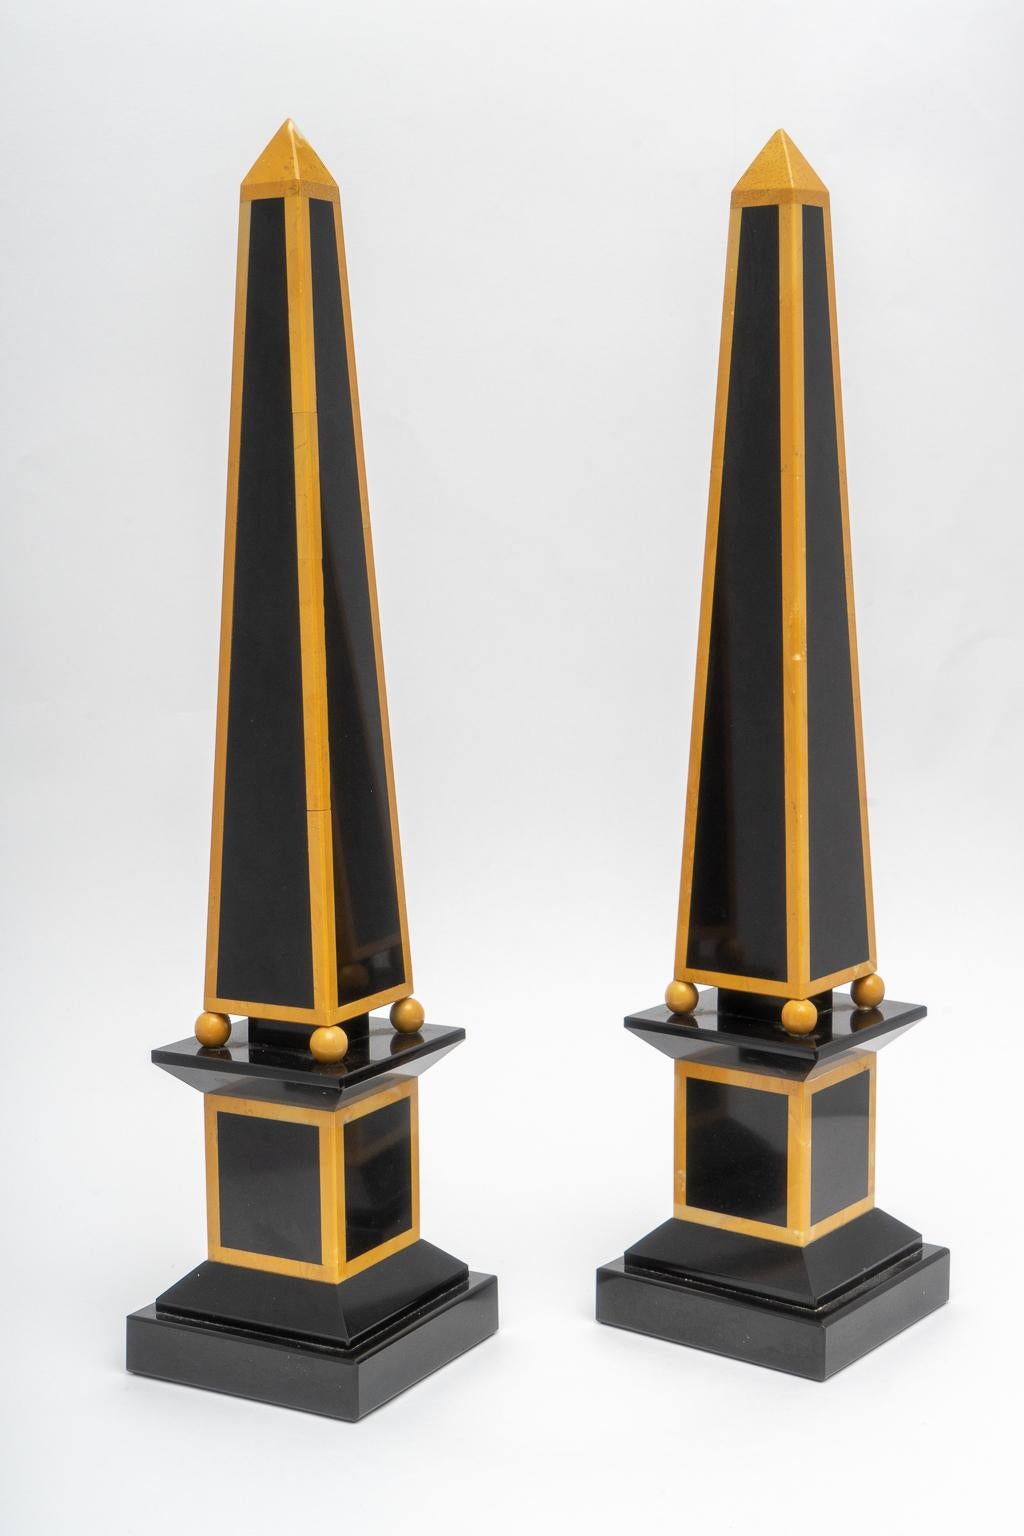 This stylish set of Egyptian Revival marble obelisks date to the 1920s-1930s and were acquired from a Palm Beach estate. The pieces are fabricated in black and mustard colored marbles.